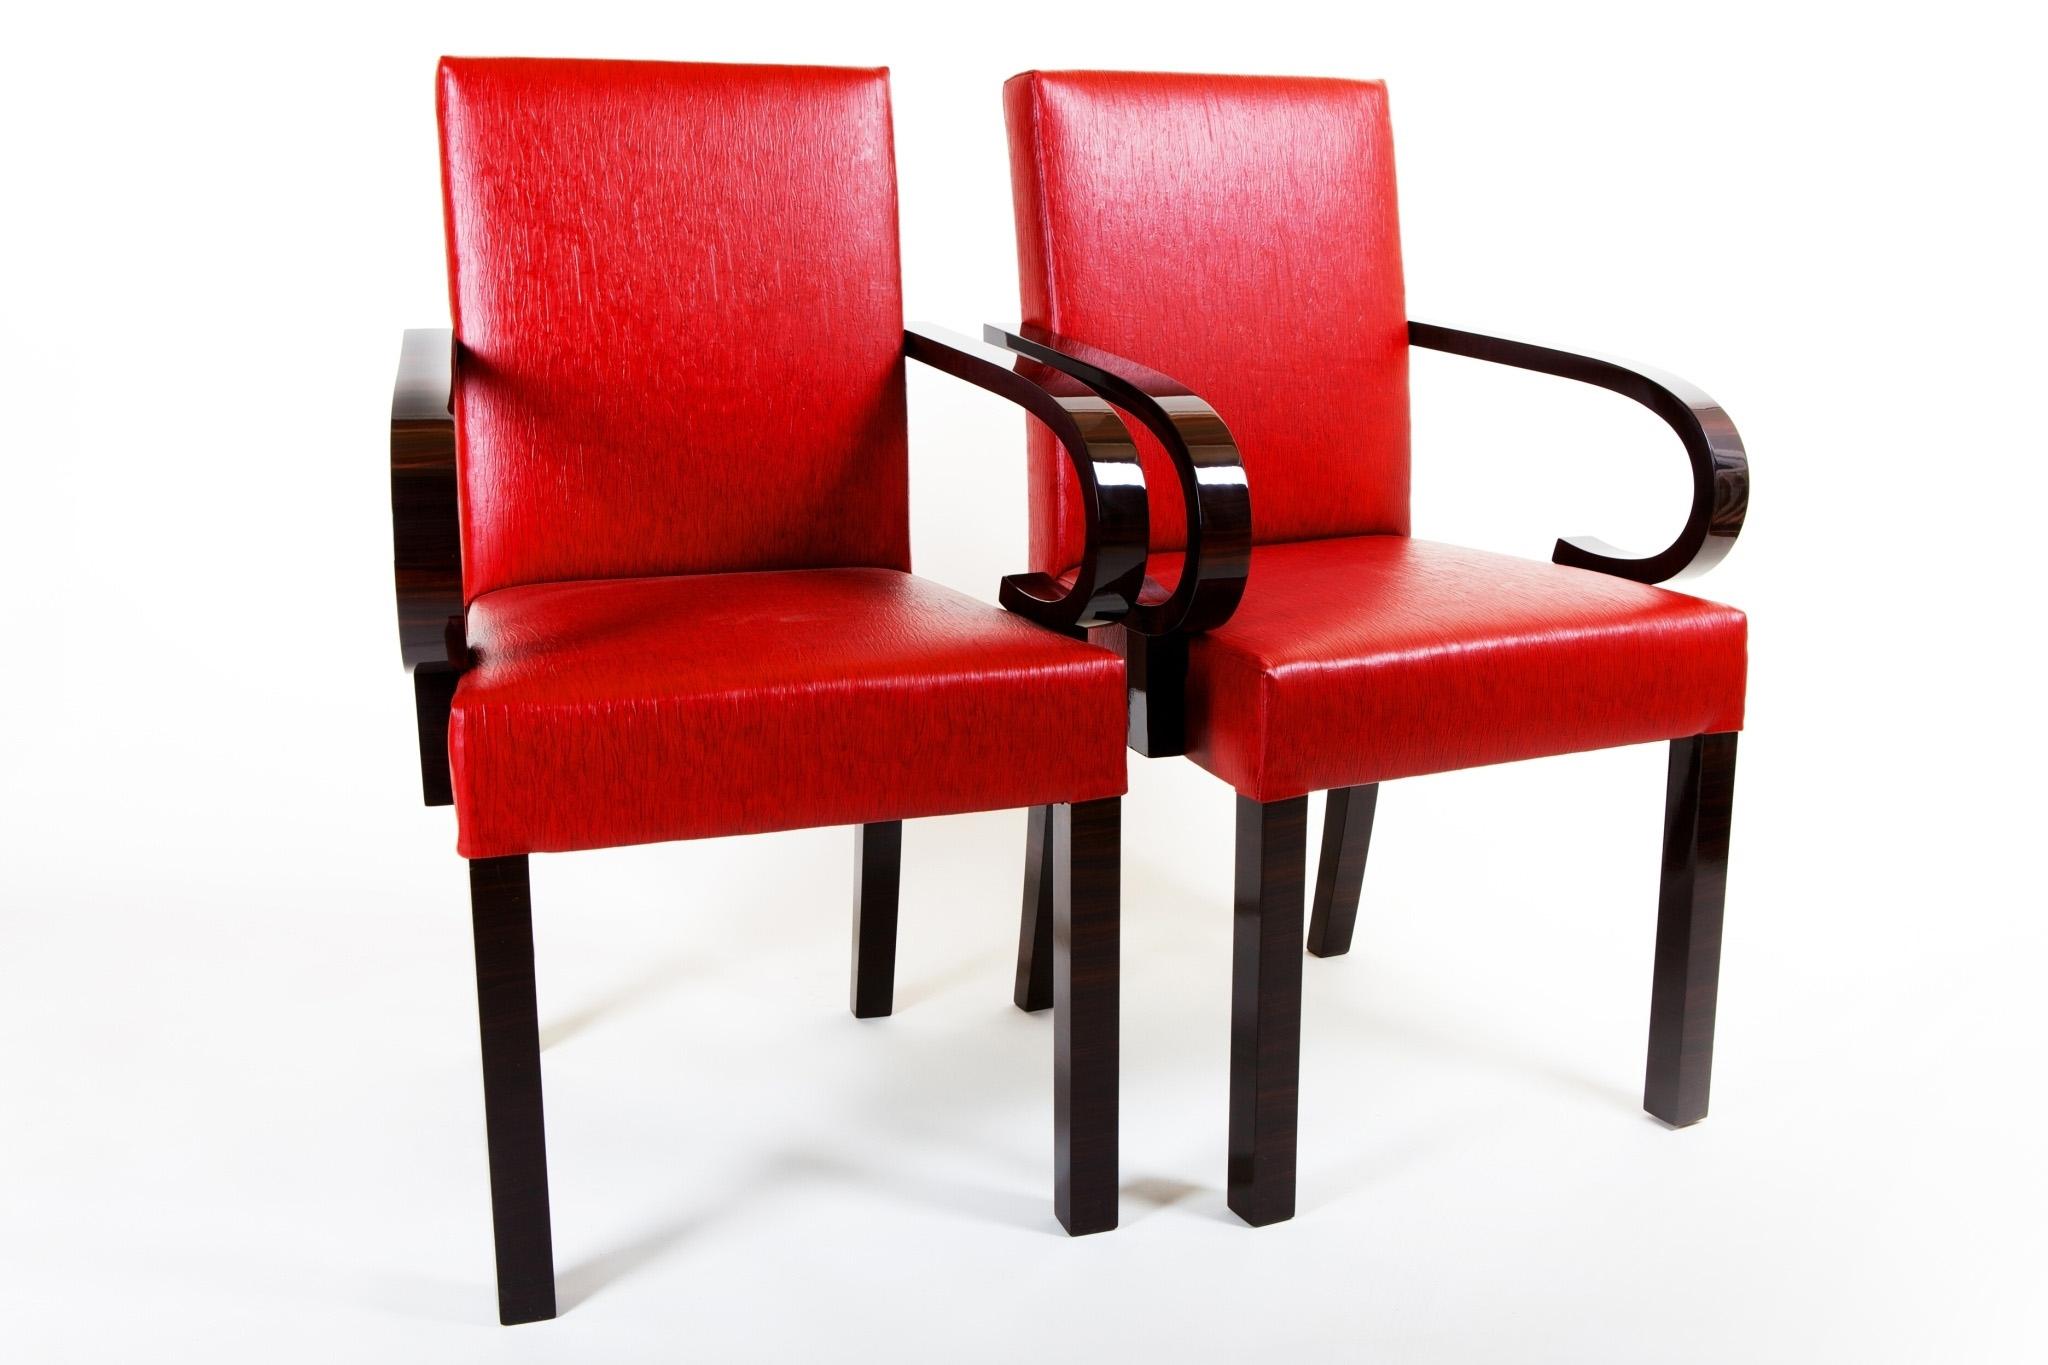 French Red Leather Armchairs, Art Deco, Made in 1920s France, Designed by Dominique For Sale